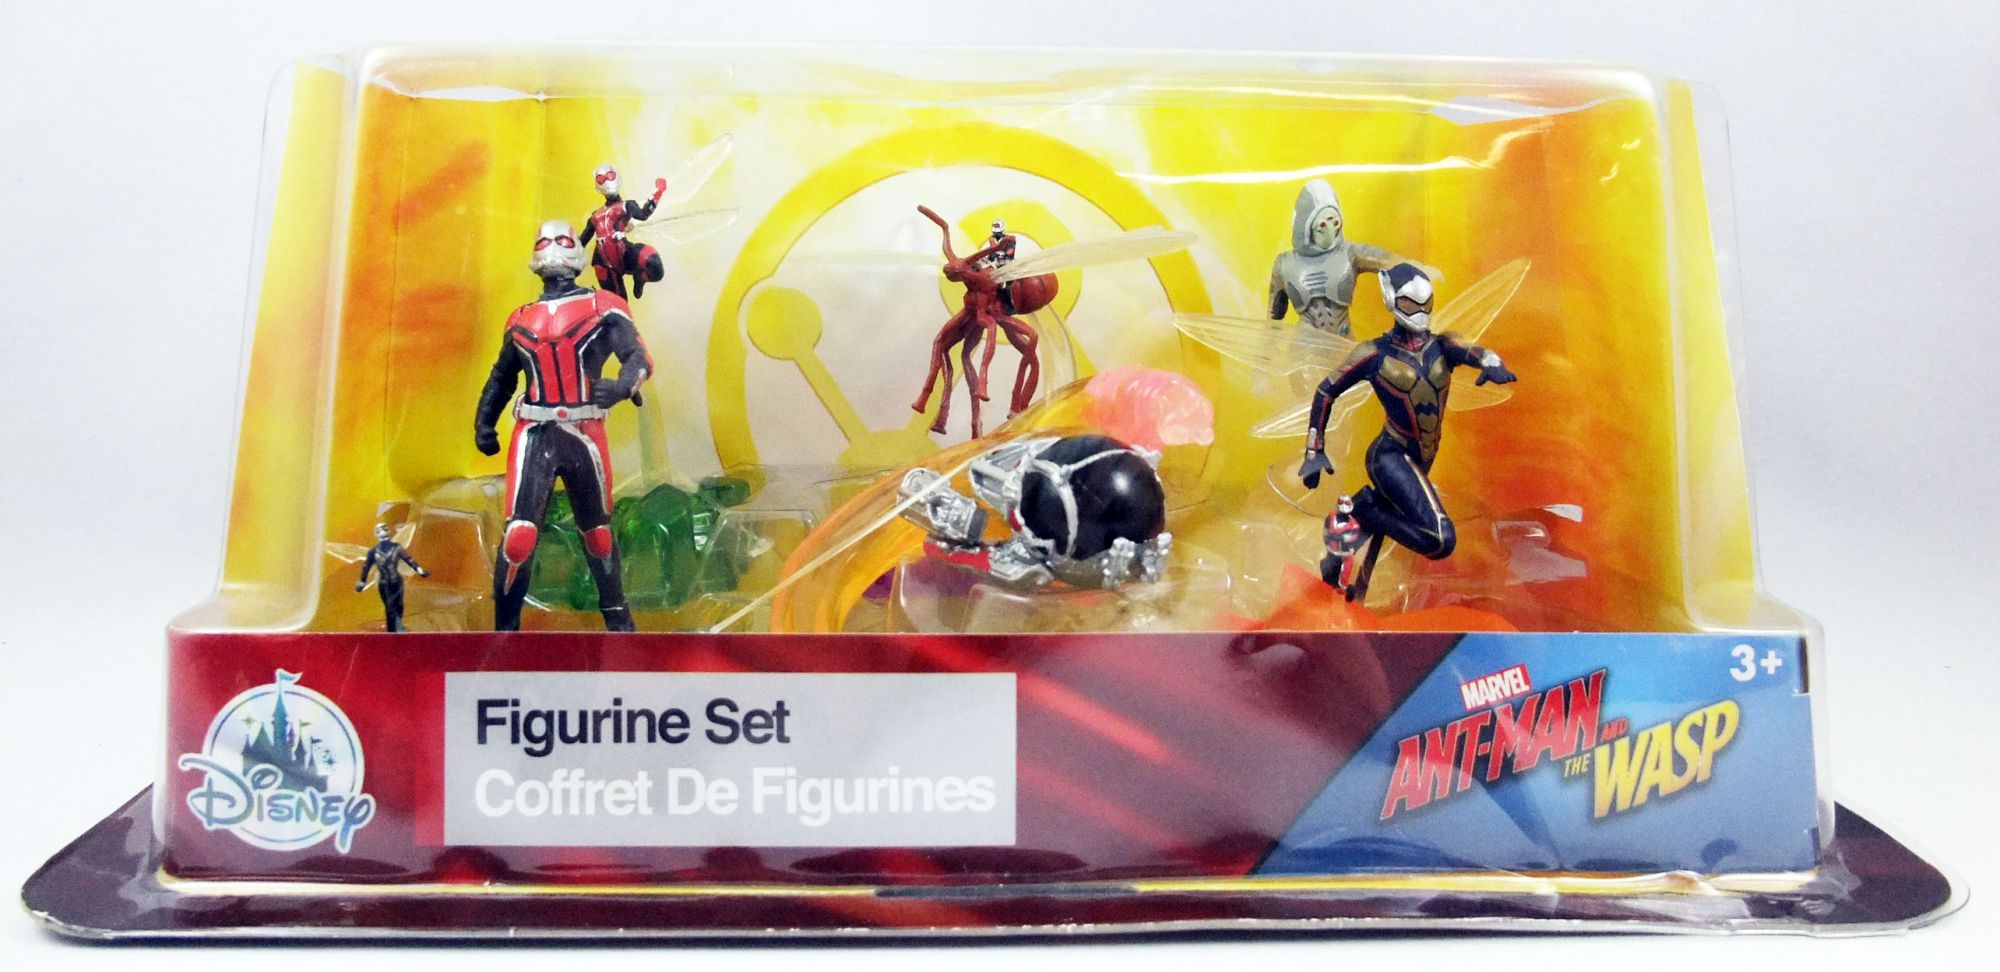 Disney Marvel Ant-Man and the Wasp Exclusive 6-Piece PVC Figure Play Set 